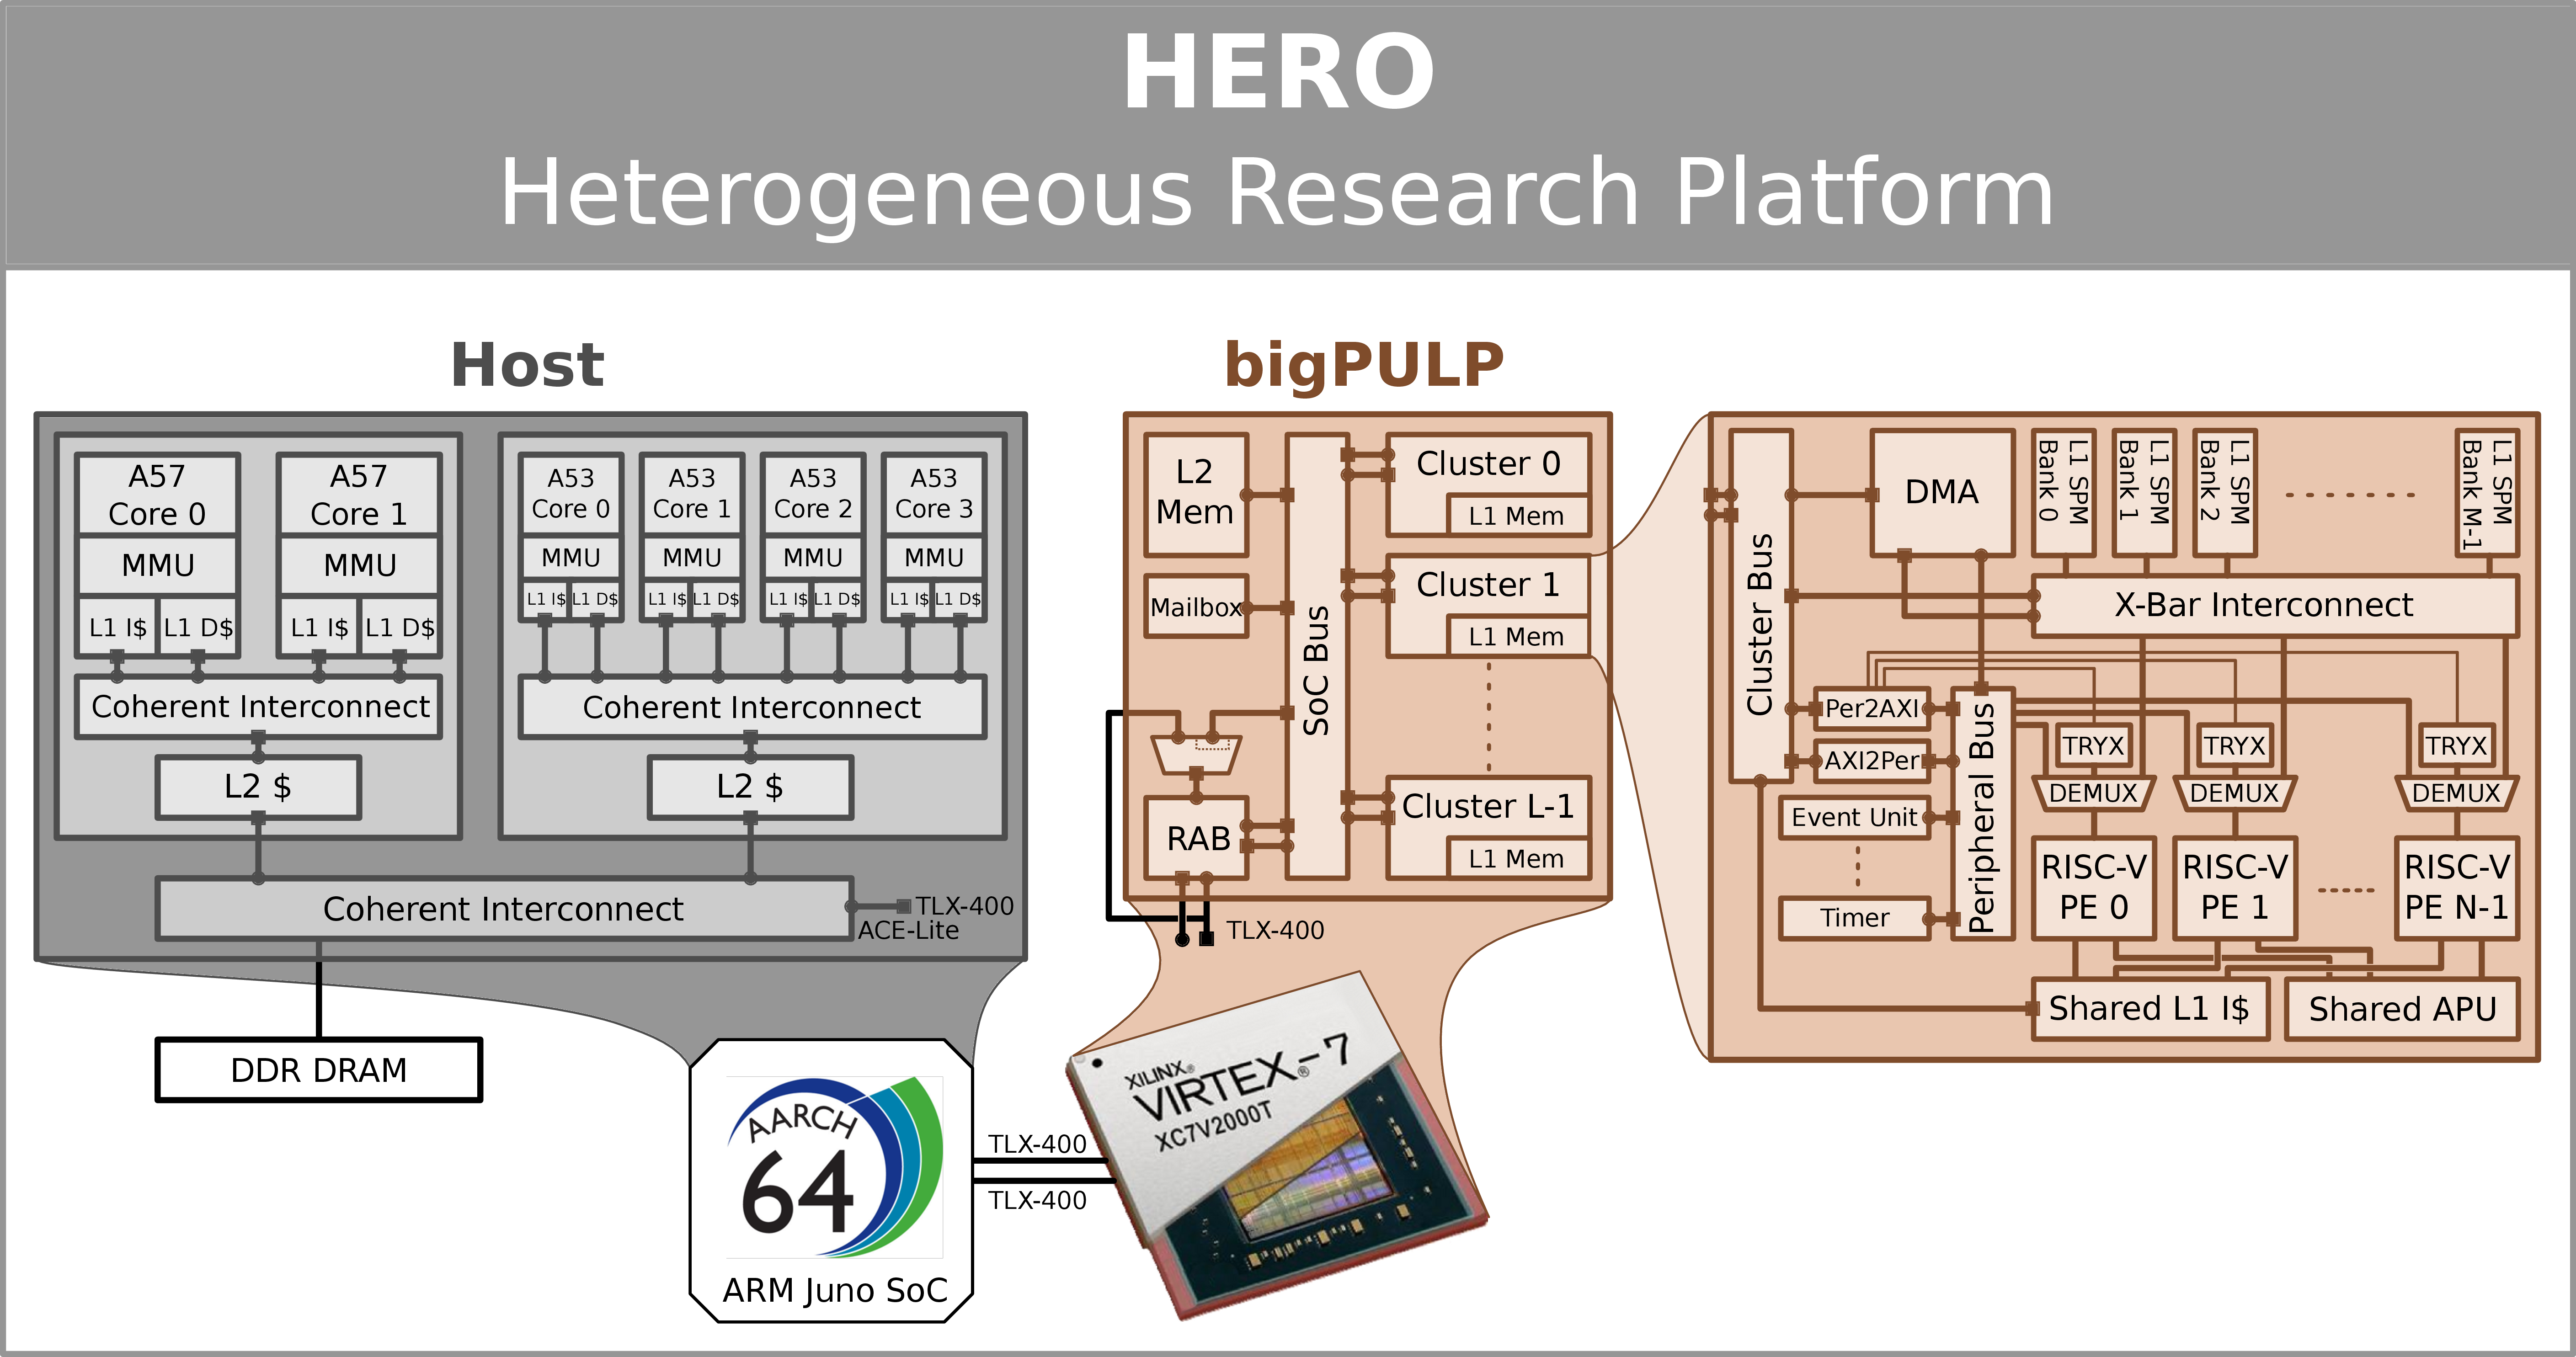 HERO hardware overview with bigPULP implemented on FPGA